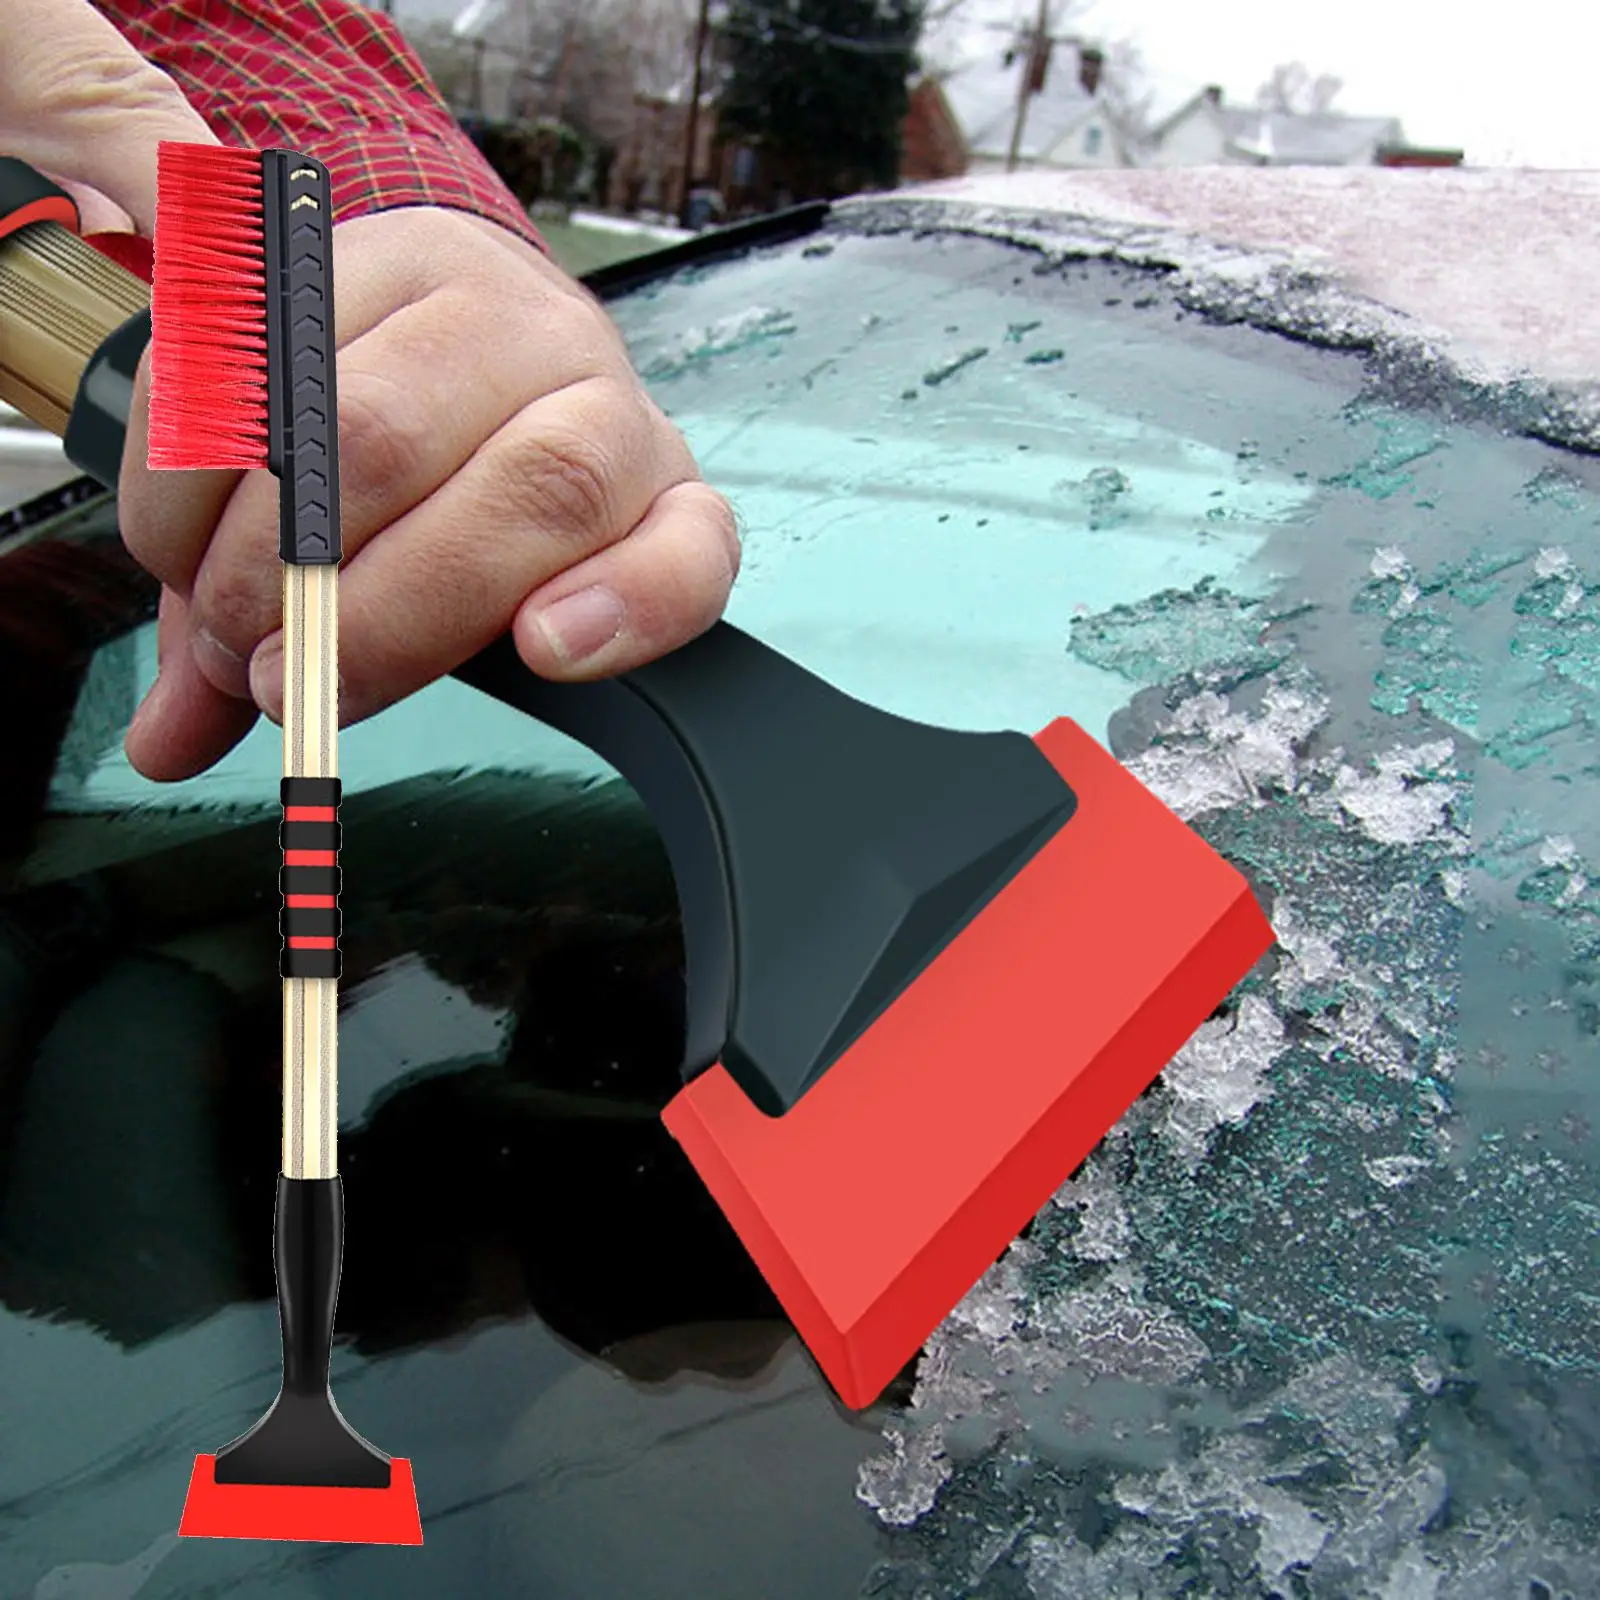 Portable Winter Snow Removal Brush Tool Telescopic Handle Car Window Snow Cleaner Ice Snow Scraper for Truck Vehicle SUV